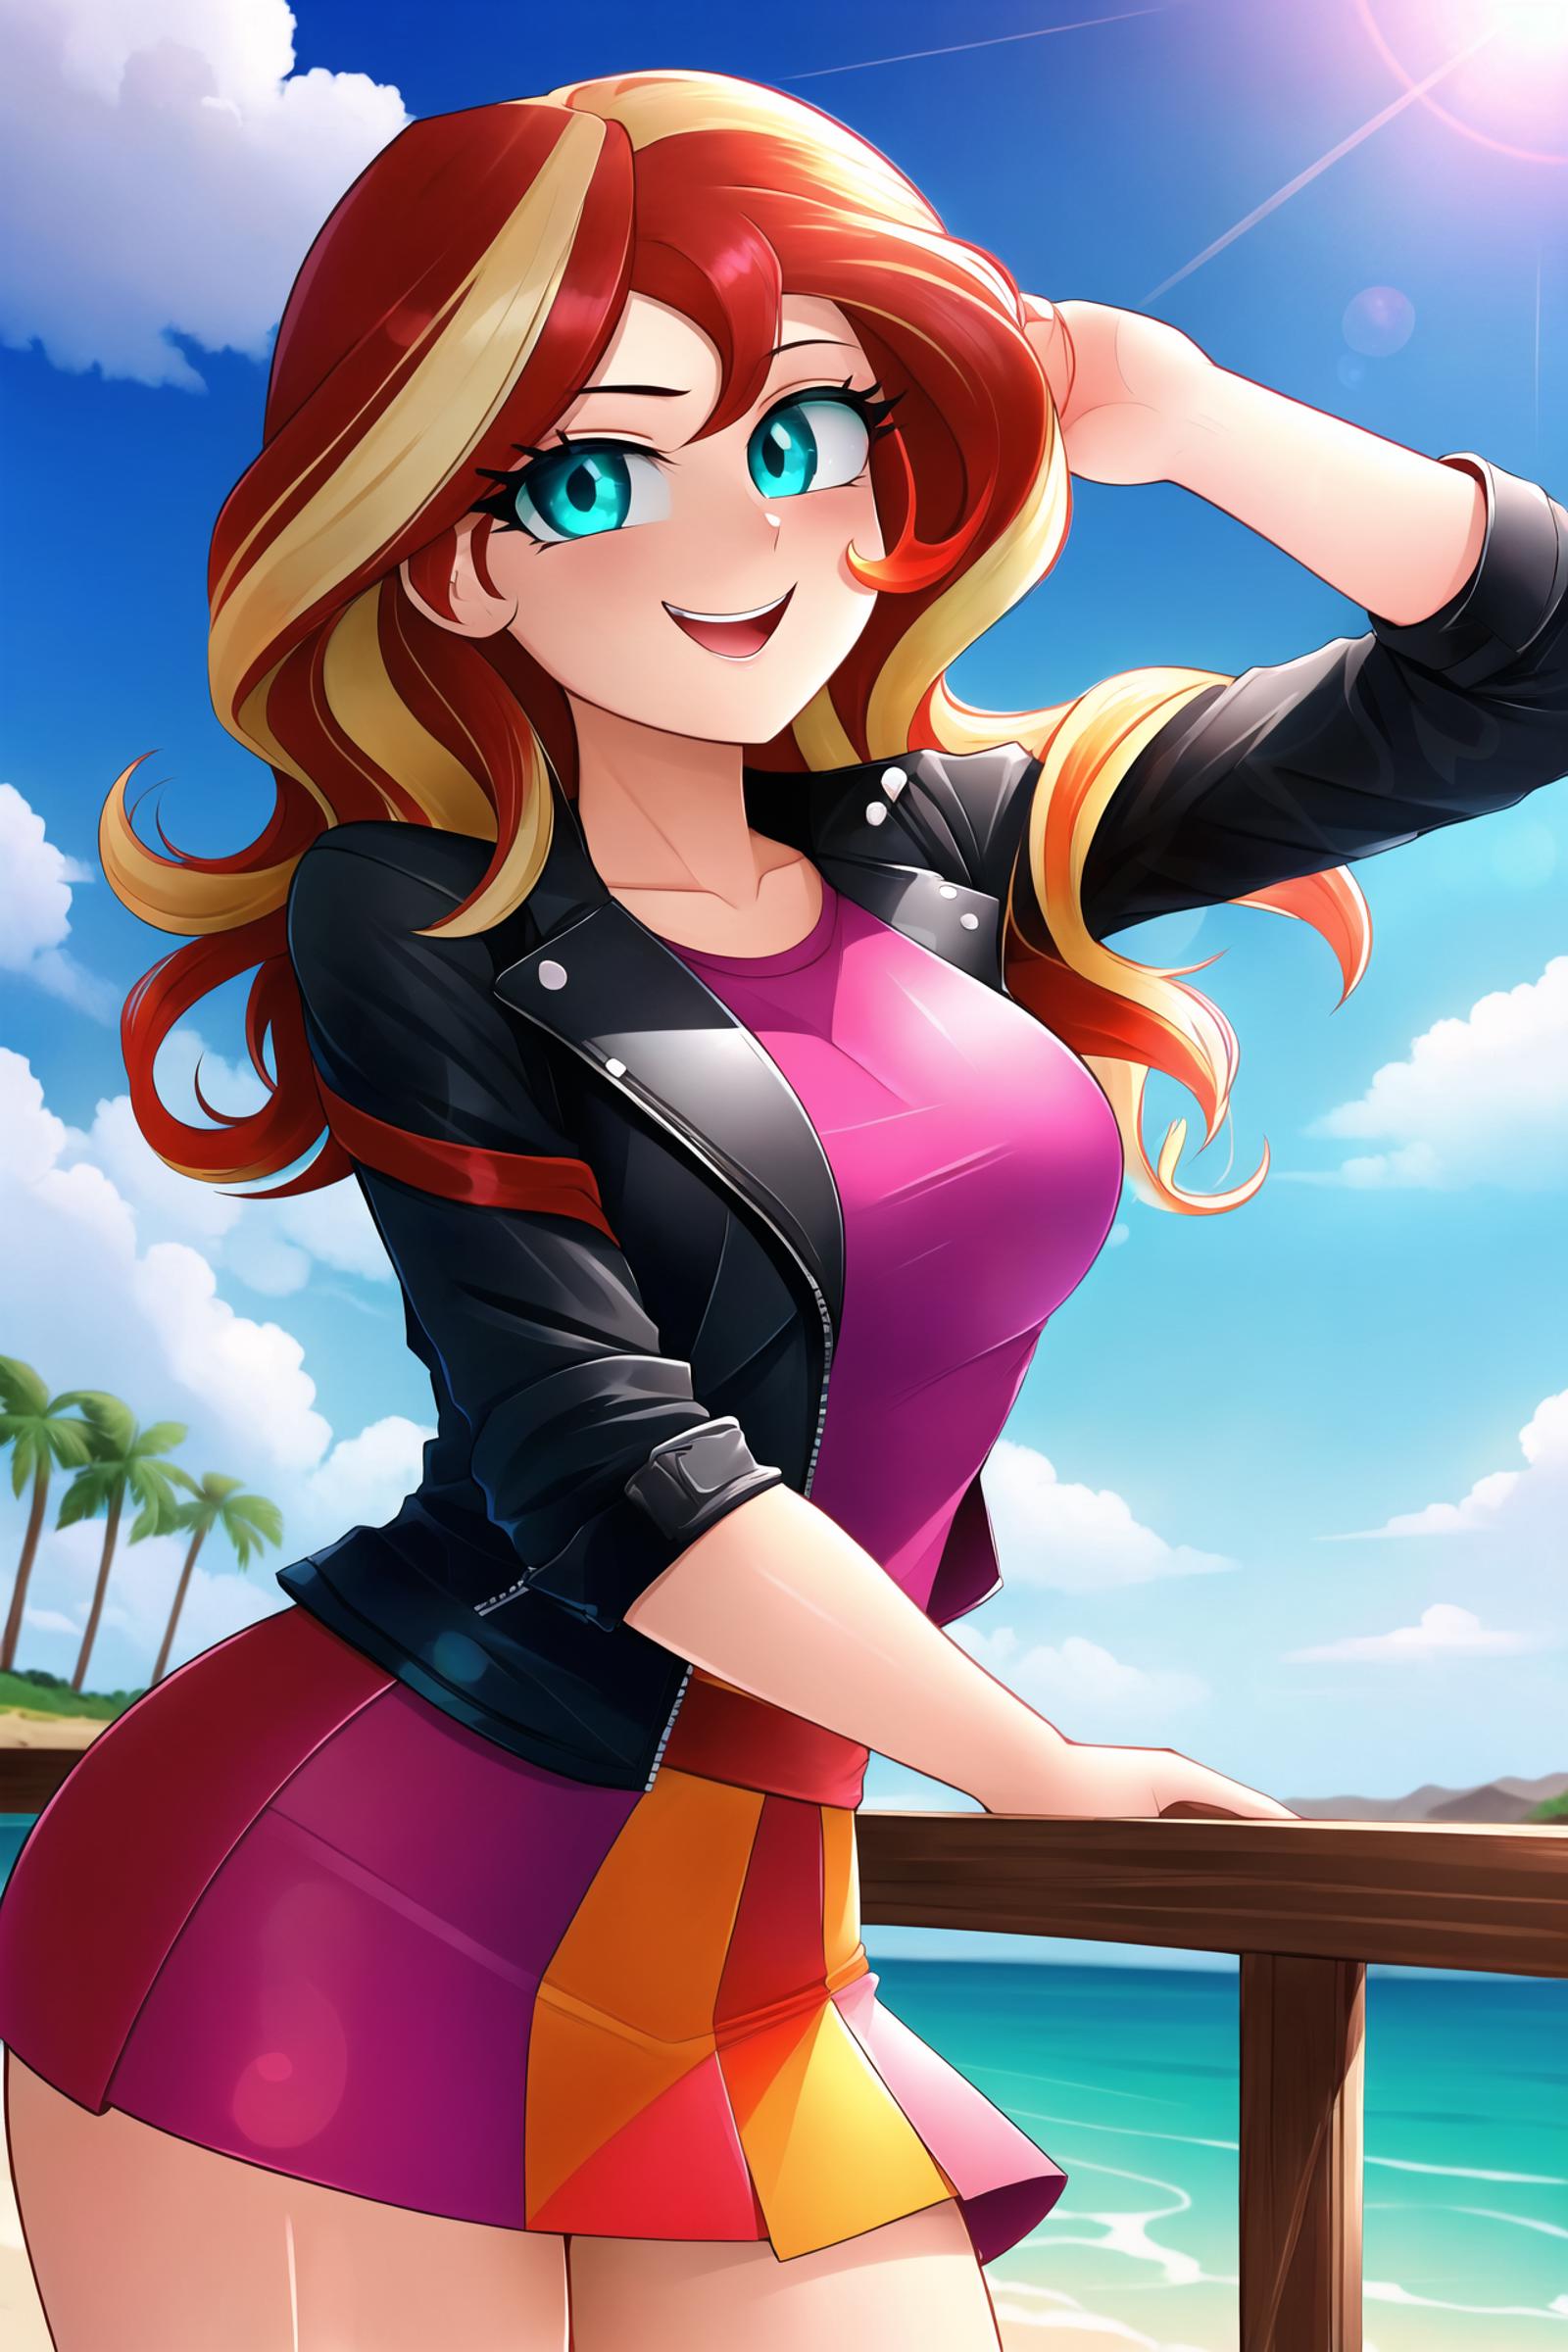 Sunset Shimmer | My Little Pony / Equestria Girls image by Kenny77